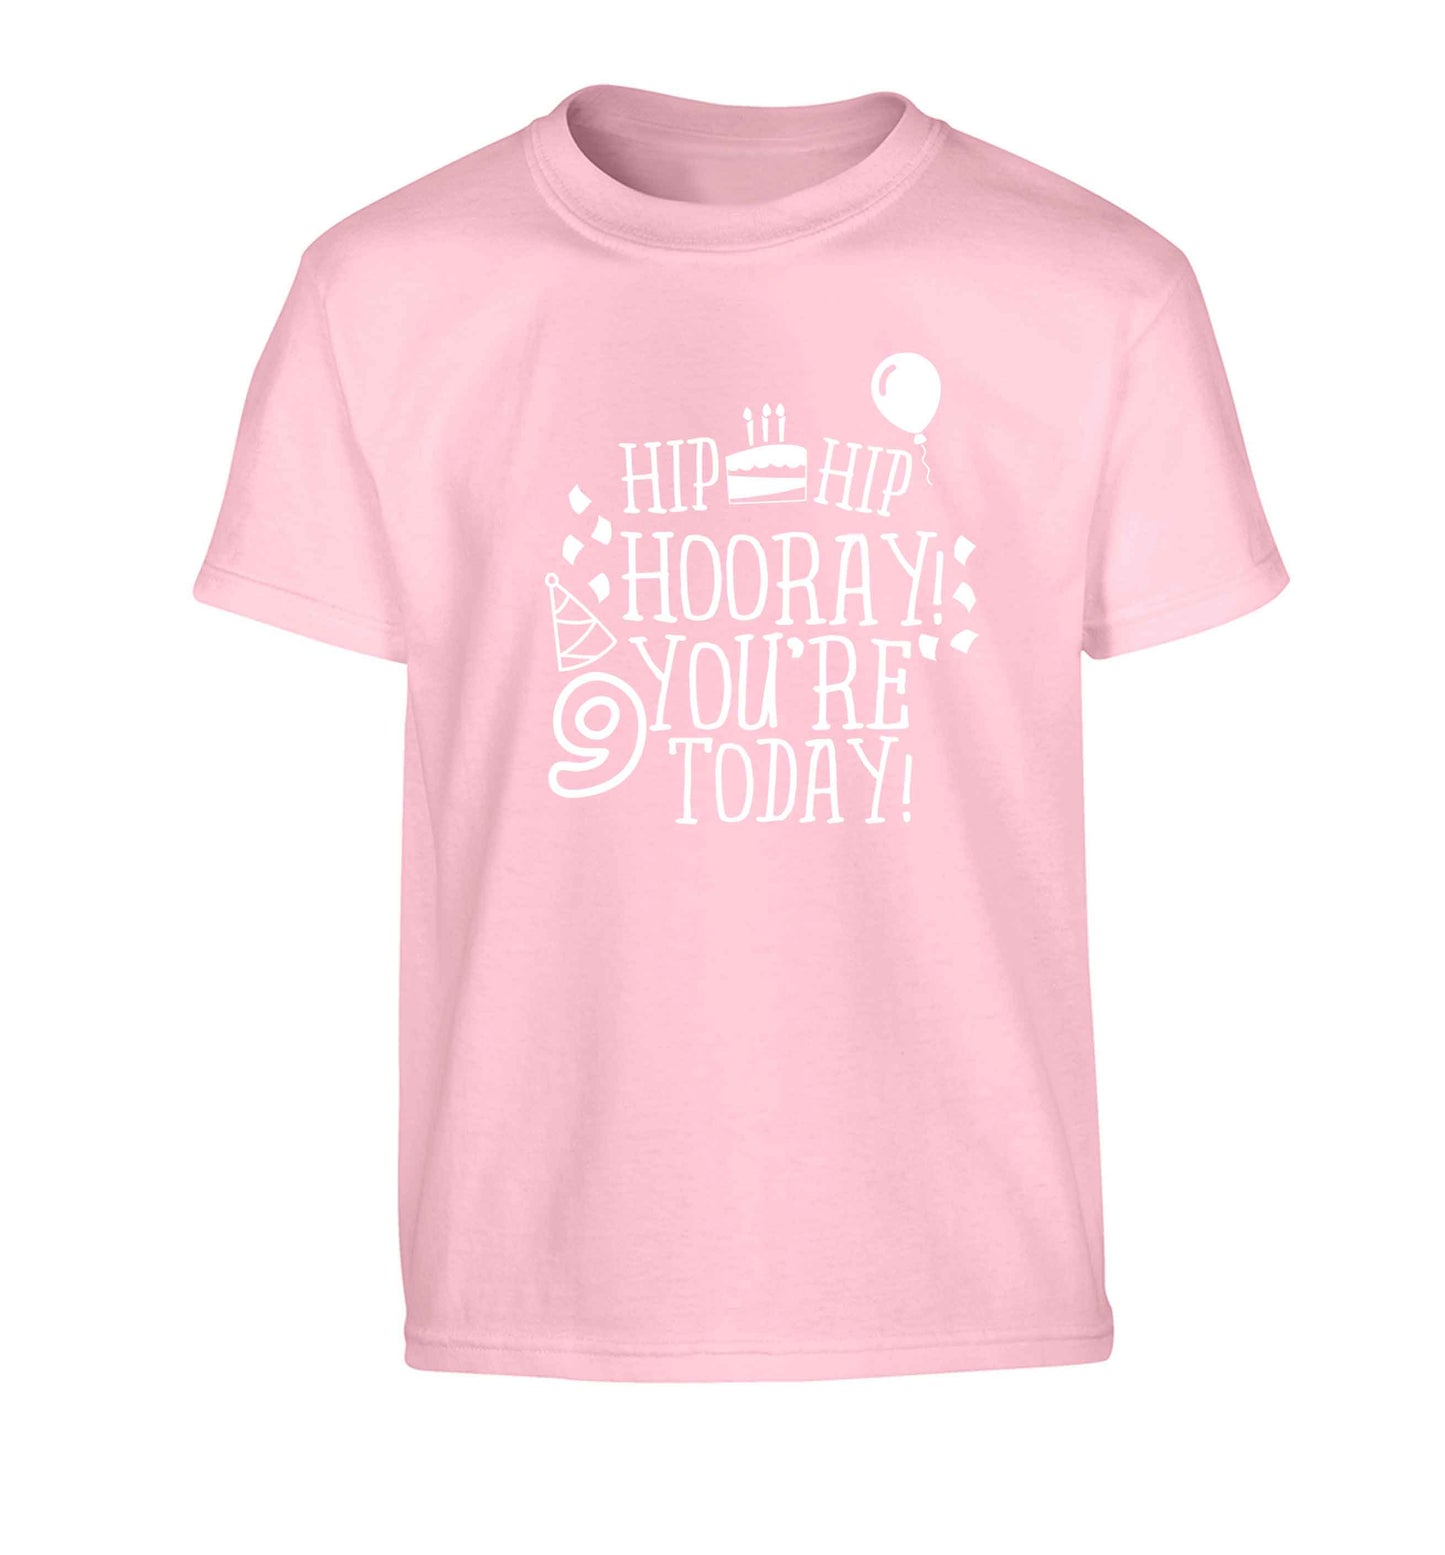 Hip hip hooray you're 9 today! Children's light pink Tshirt 12-13 Years